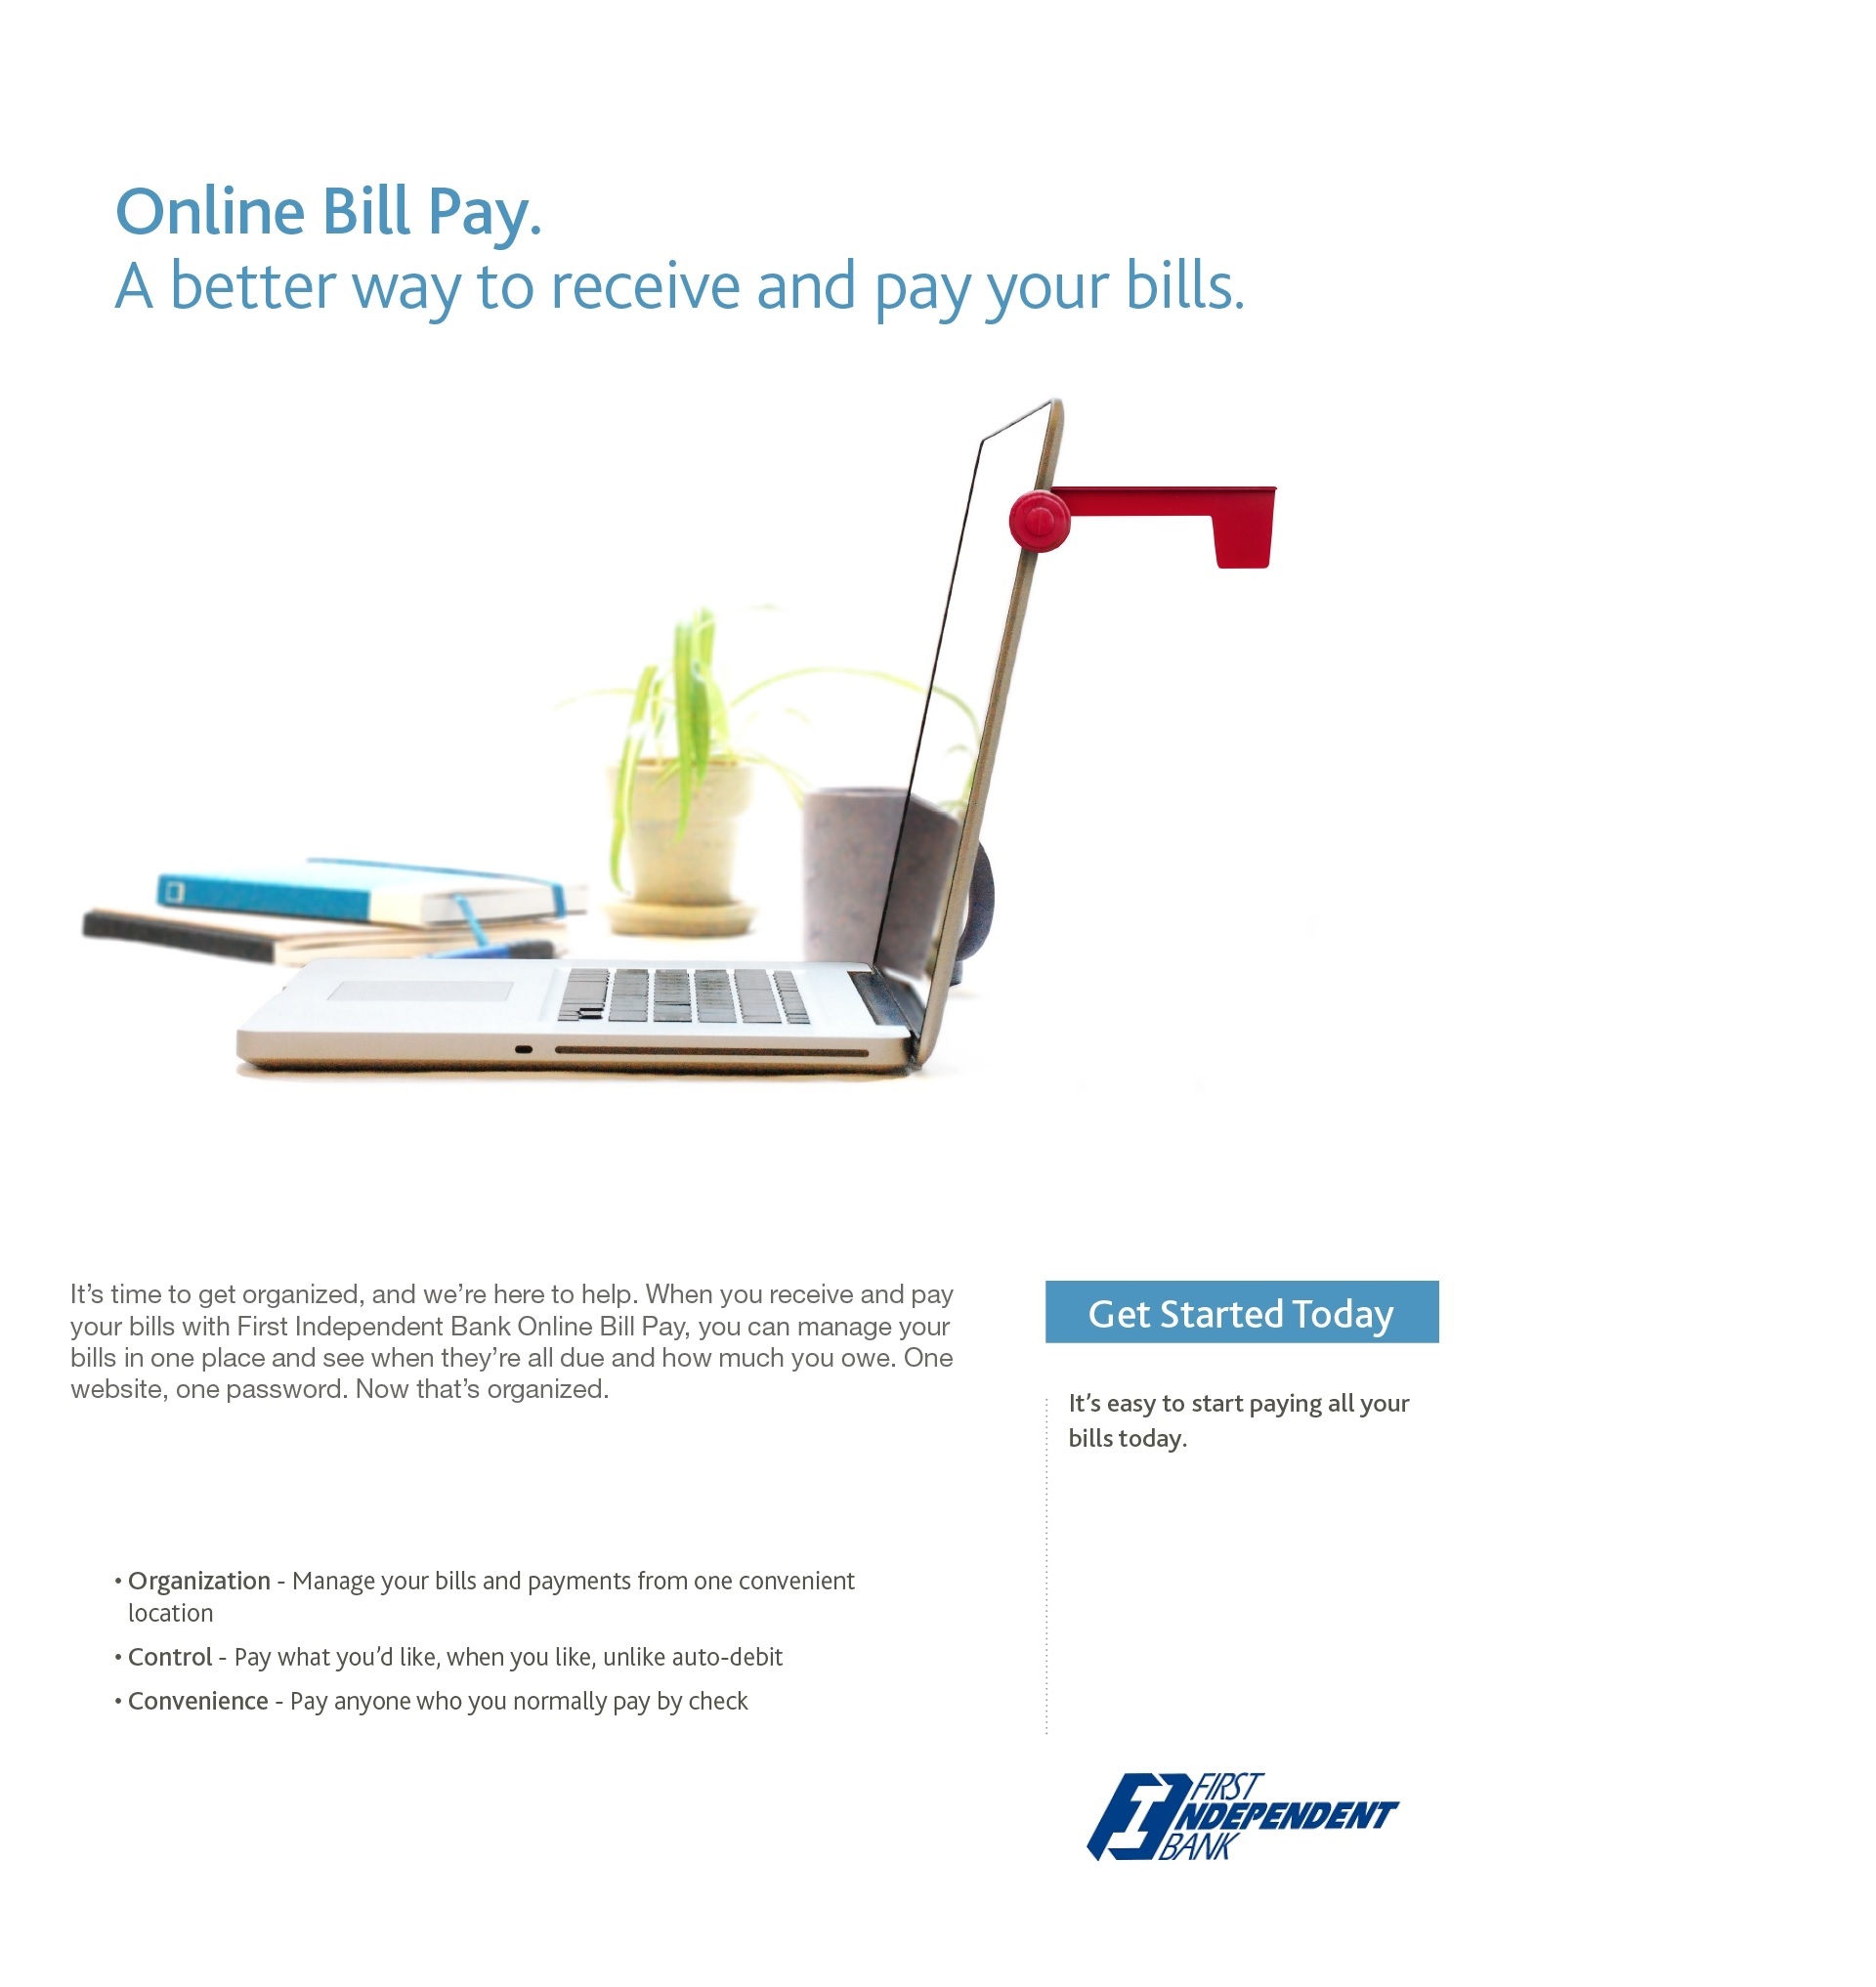 Bill Pay poster